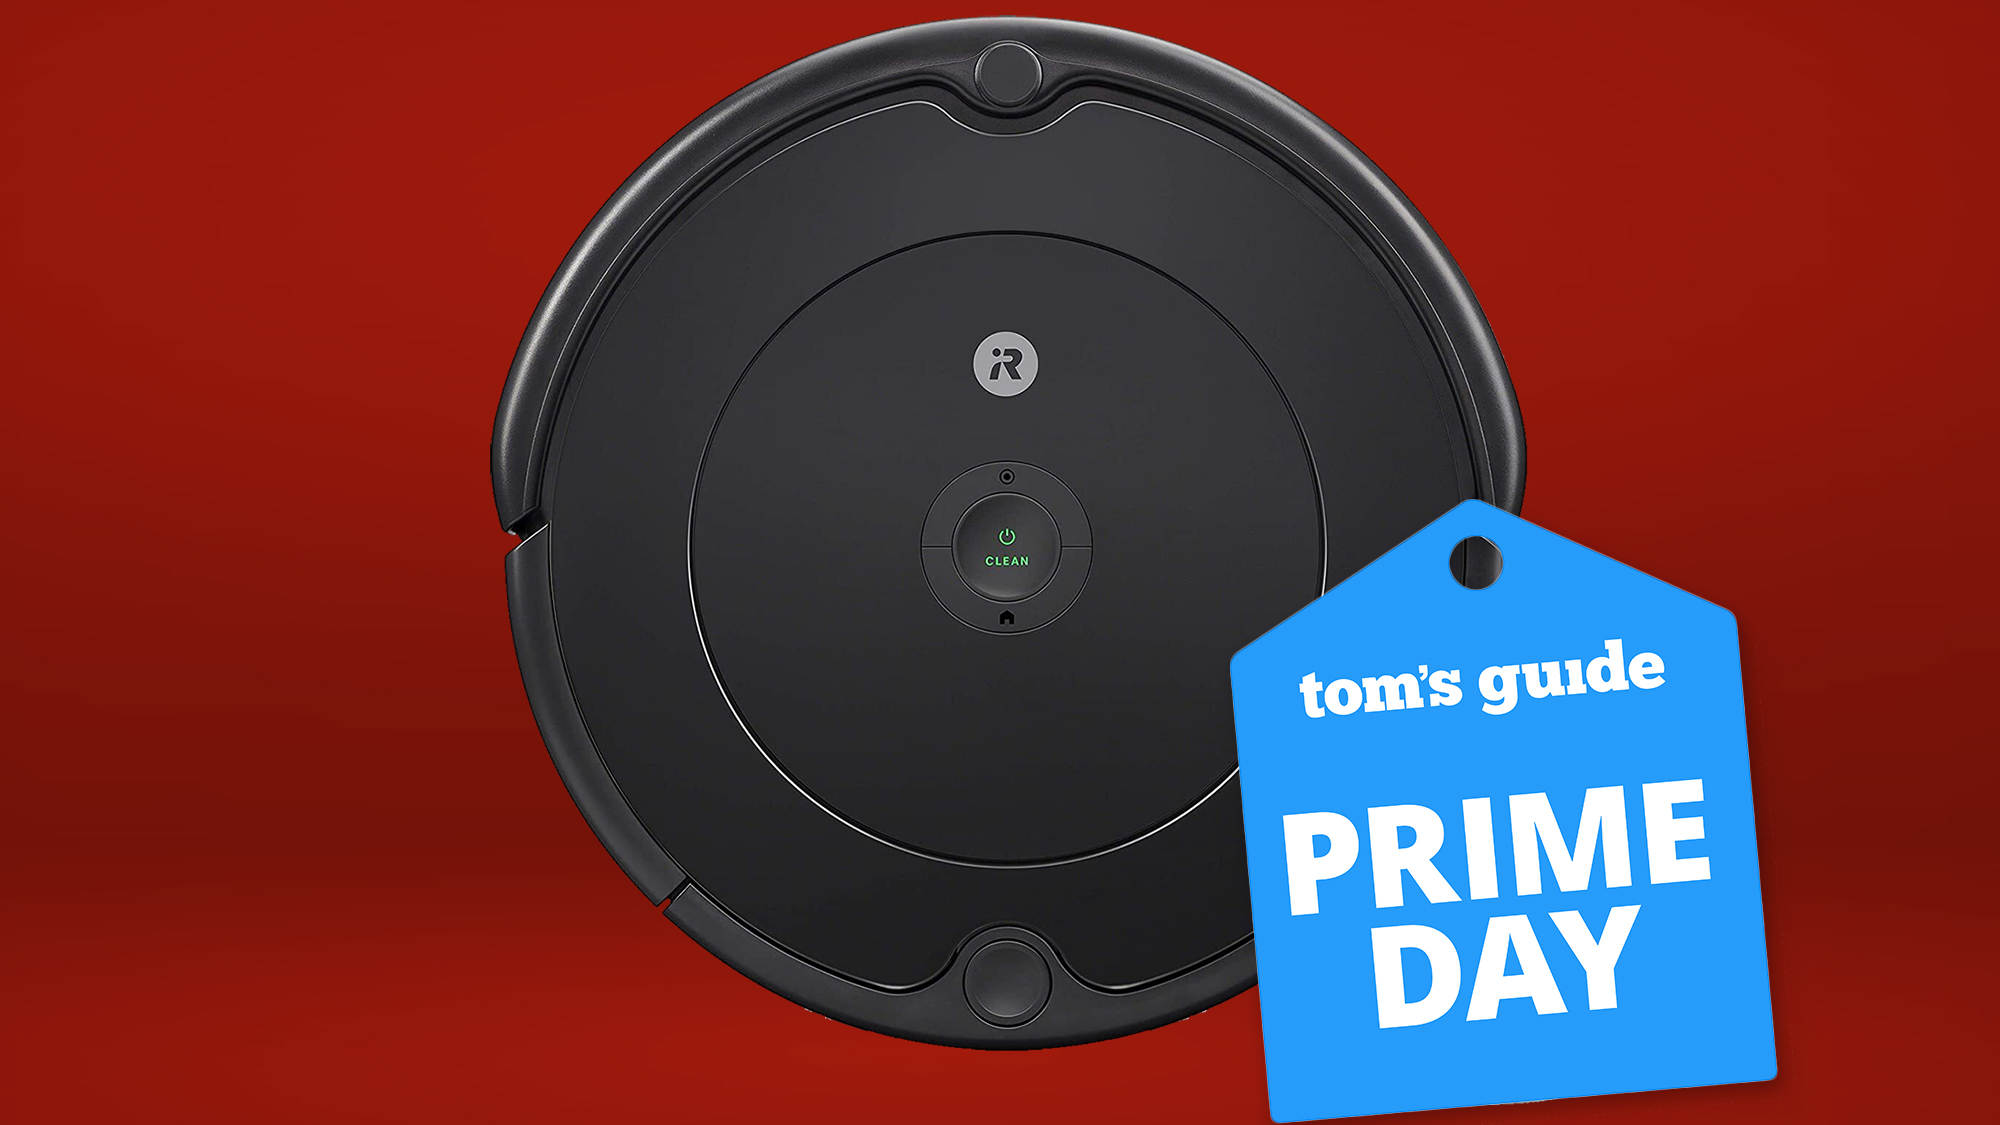 Clean up on Prime Day with this Roomba robot vacuum deal for $199